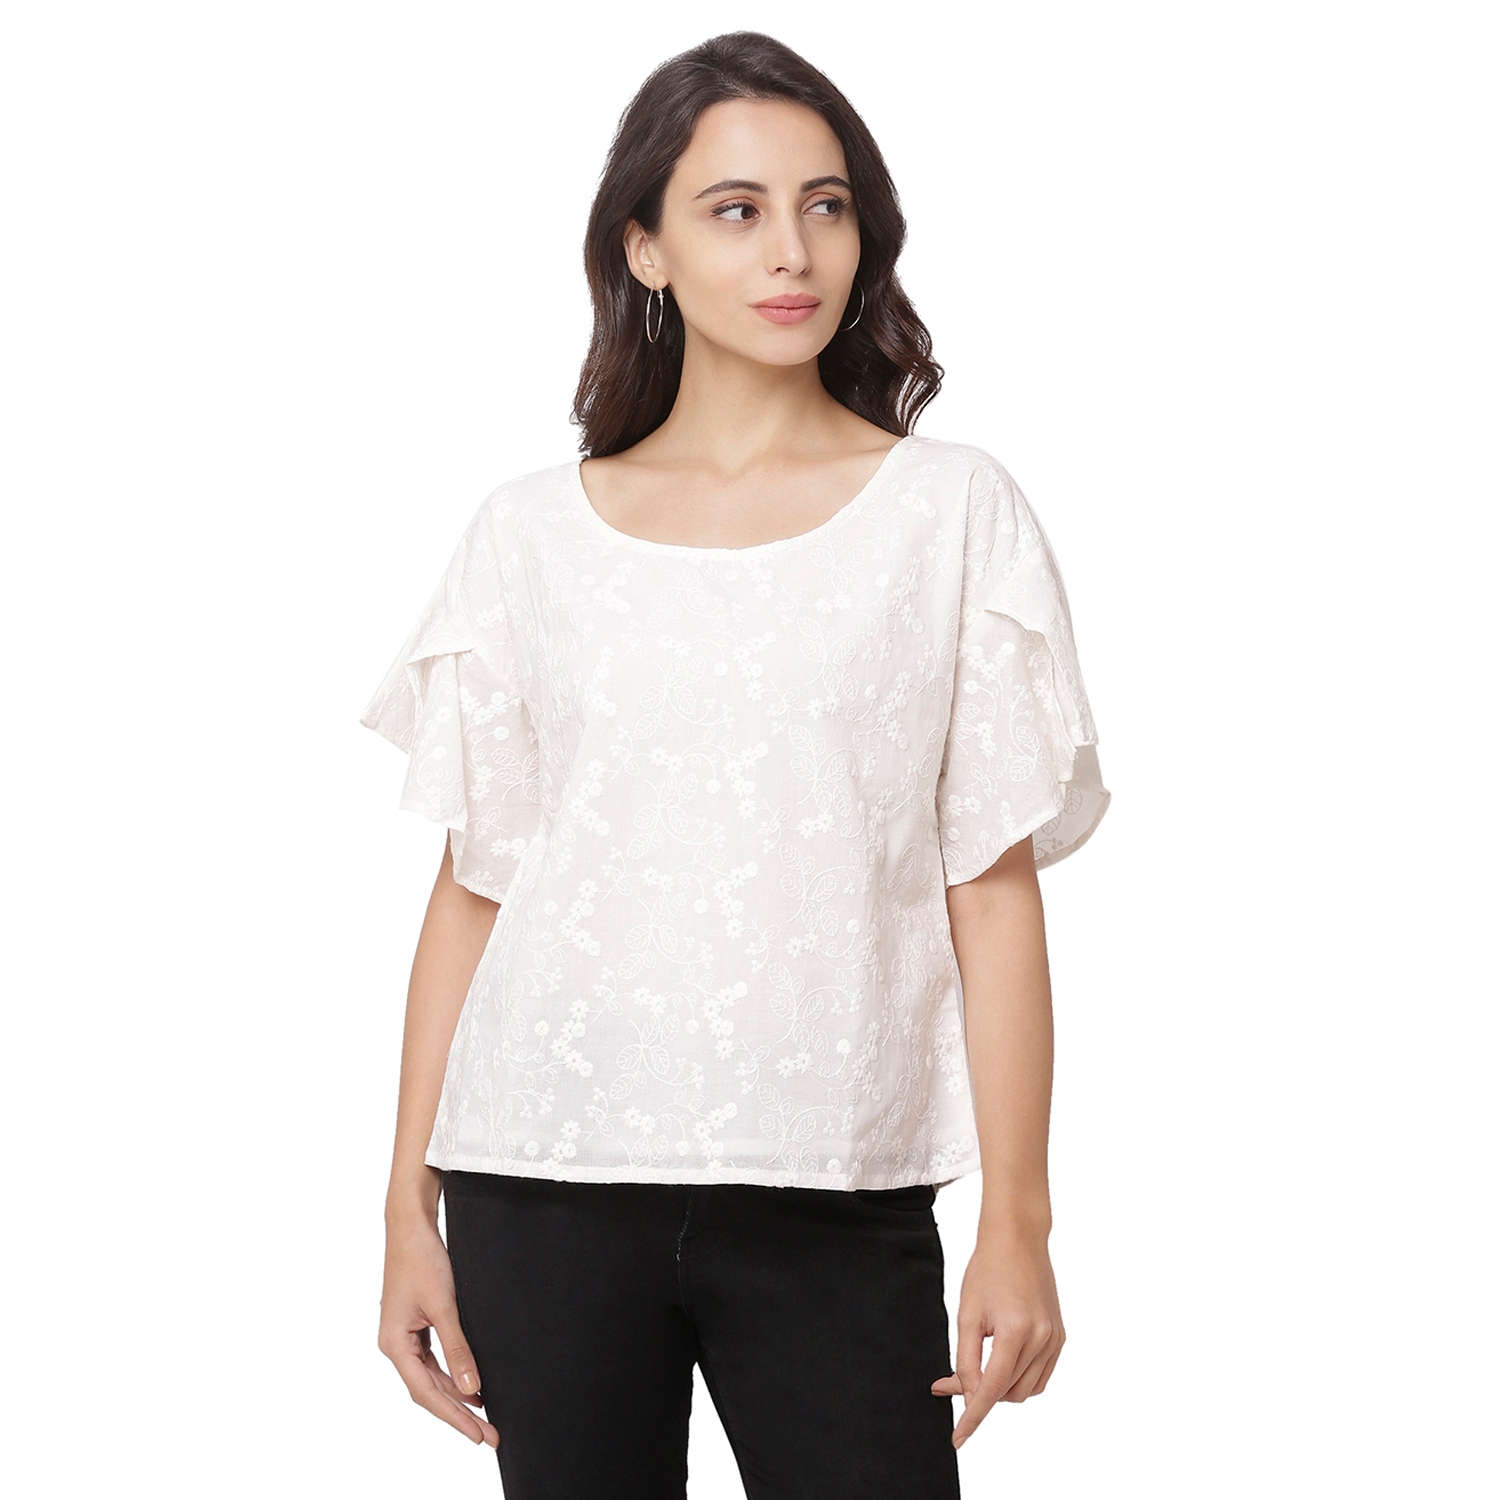 globus | White Solid Top